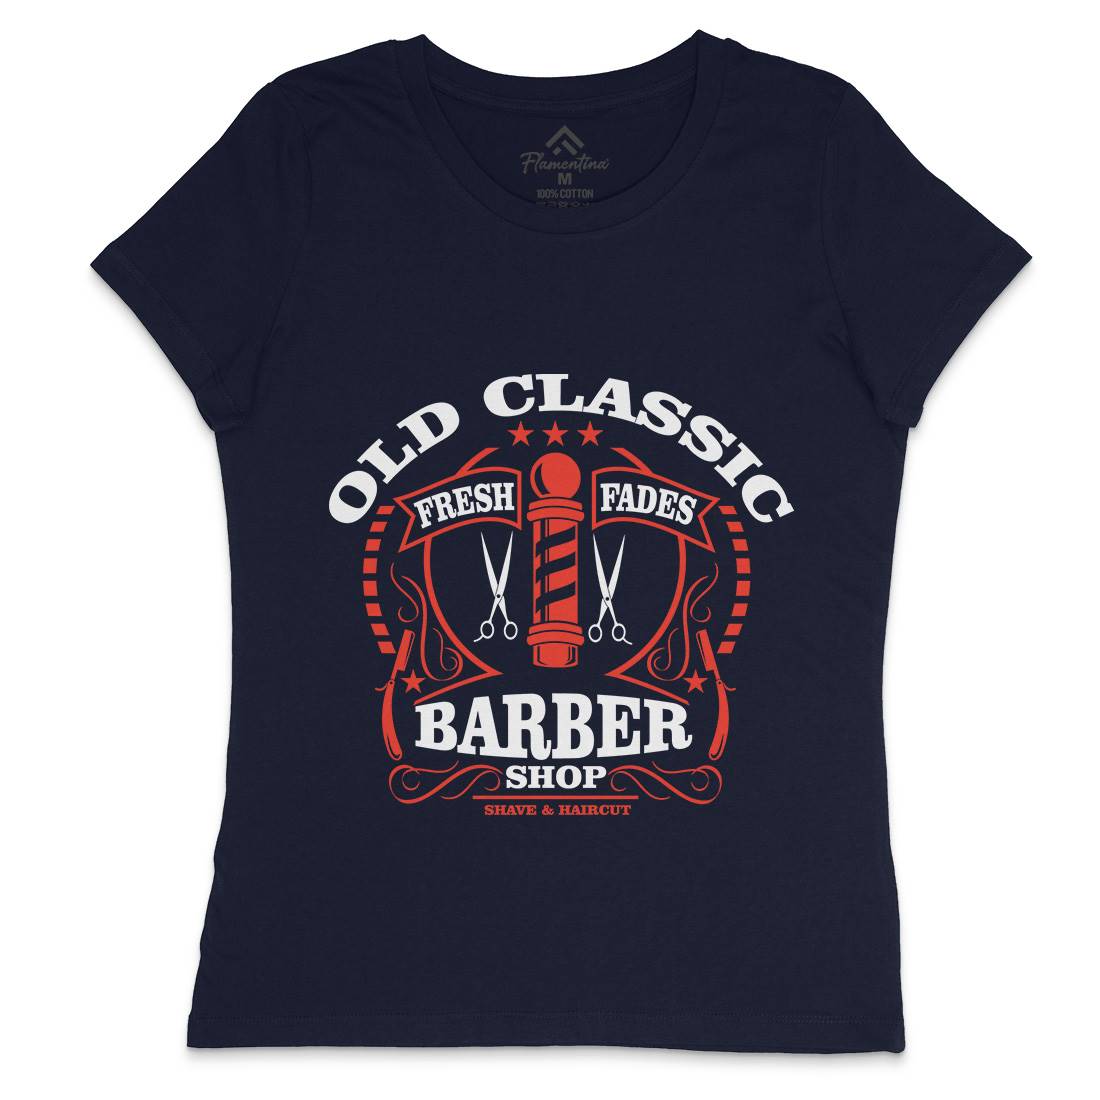 Old Classic Womens Crew Neck T-Shirt Barber A099